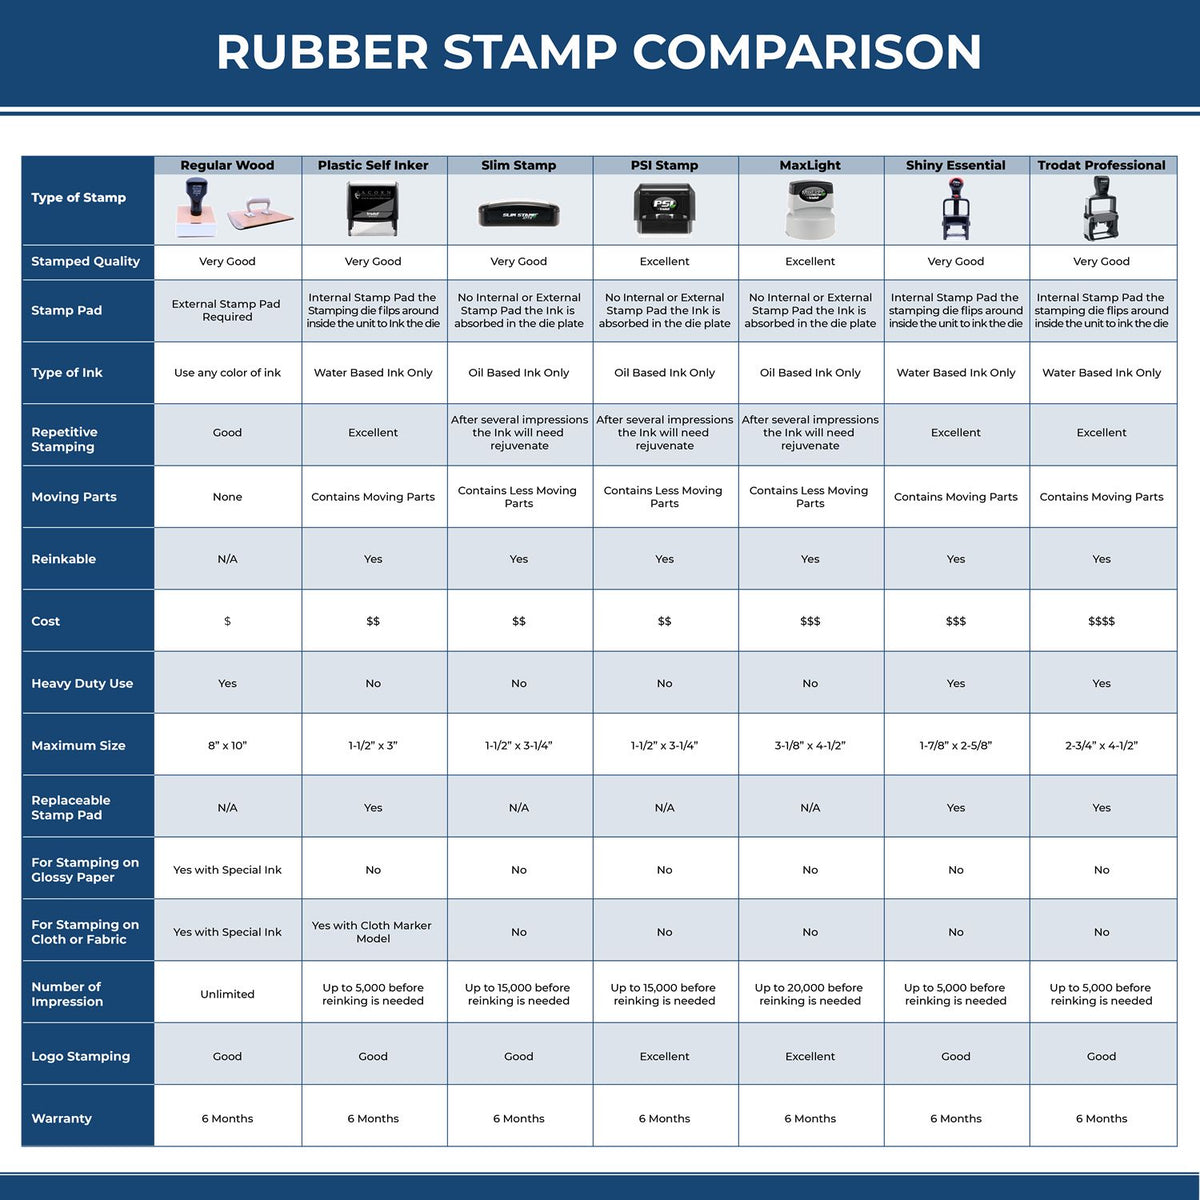 A comparison chart for the different types of mount models available for the Wooden Handle Wyoming Rectangular Notary Public Stamp.